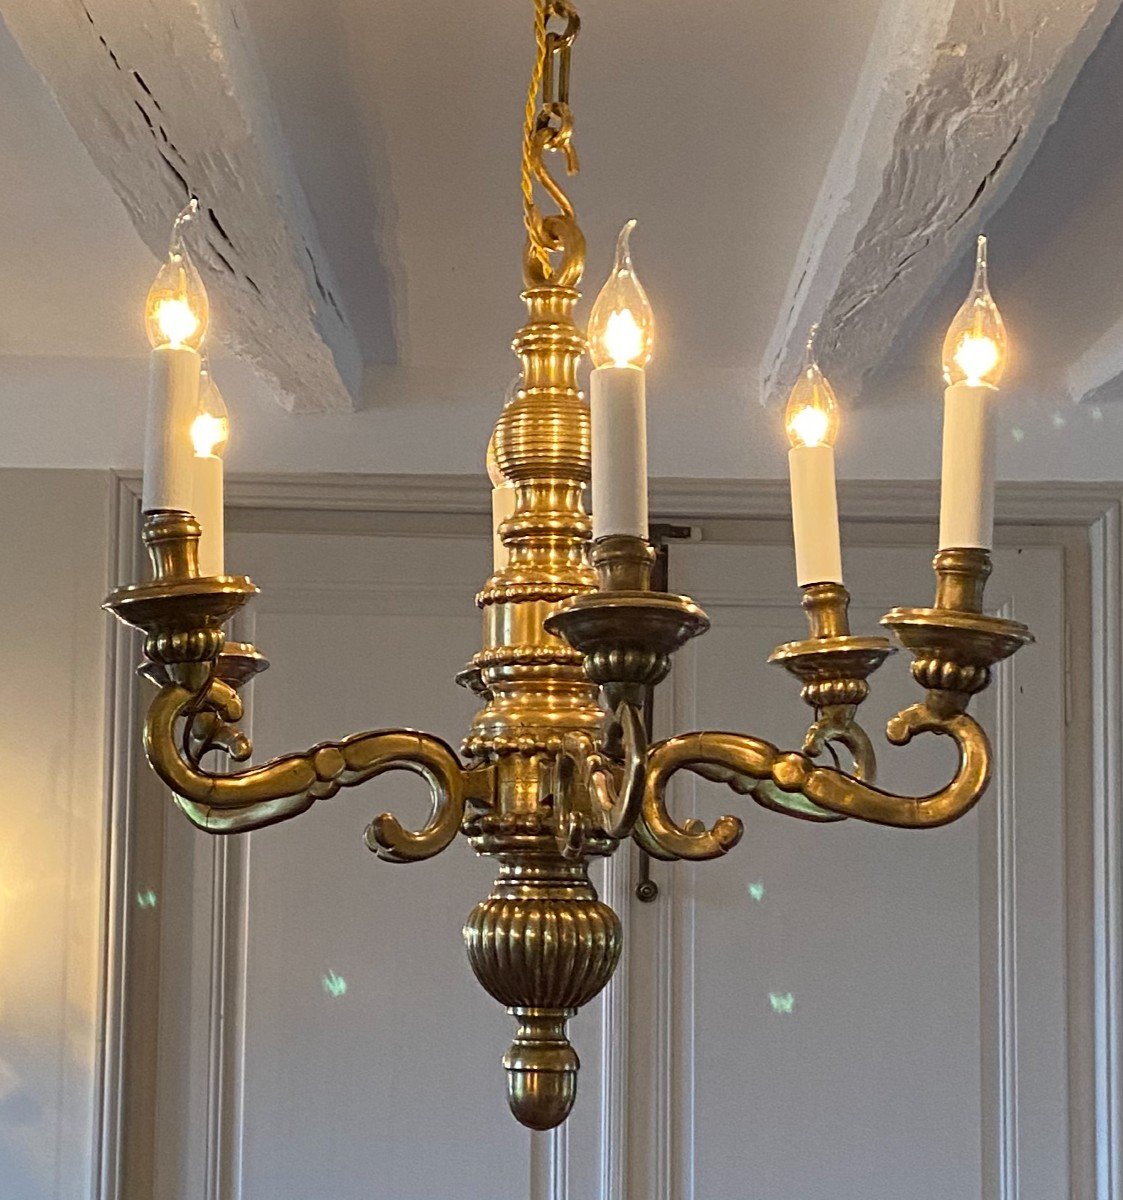 Bronze Chandelier With 6 Arms Of Light